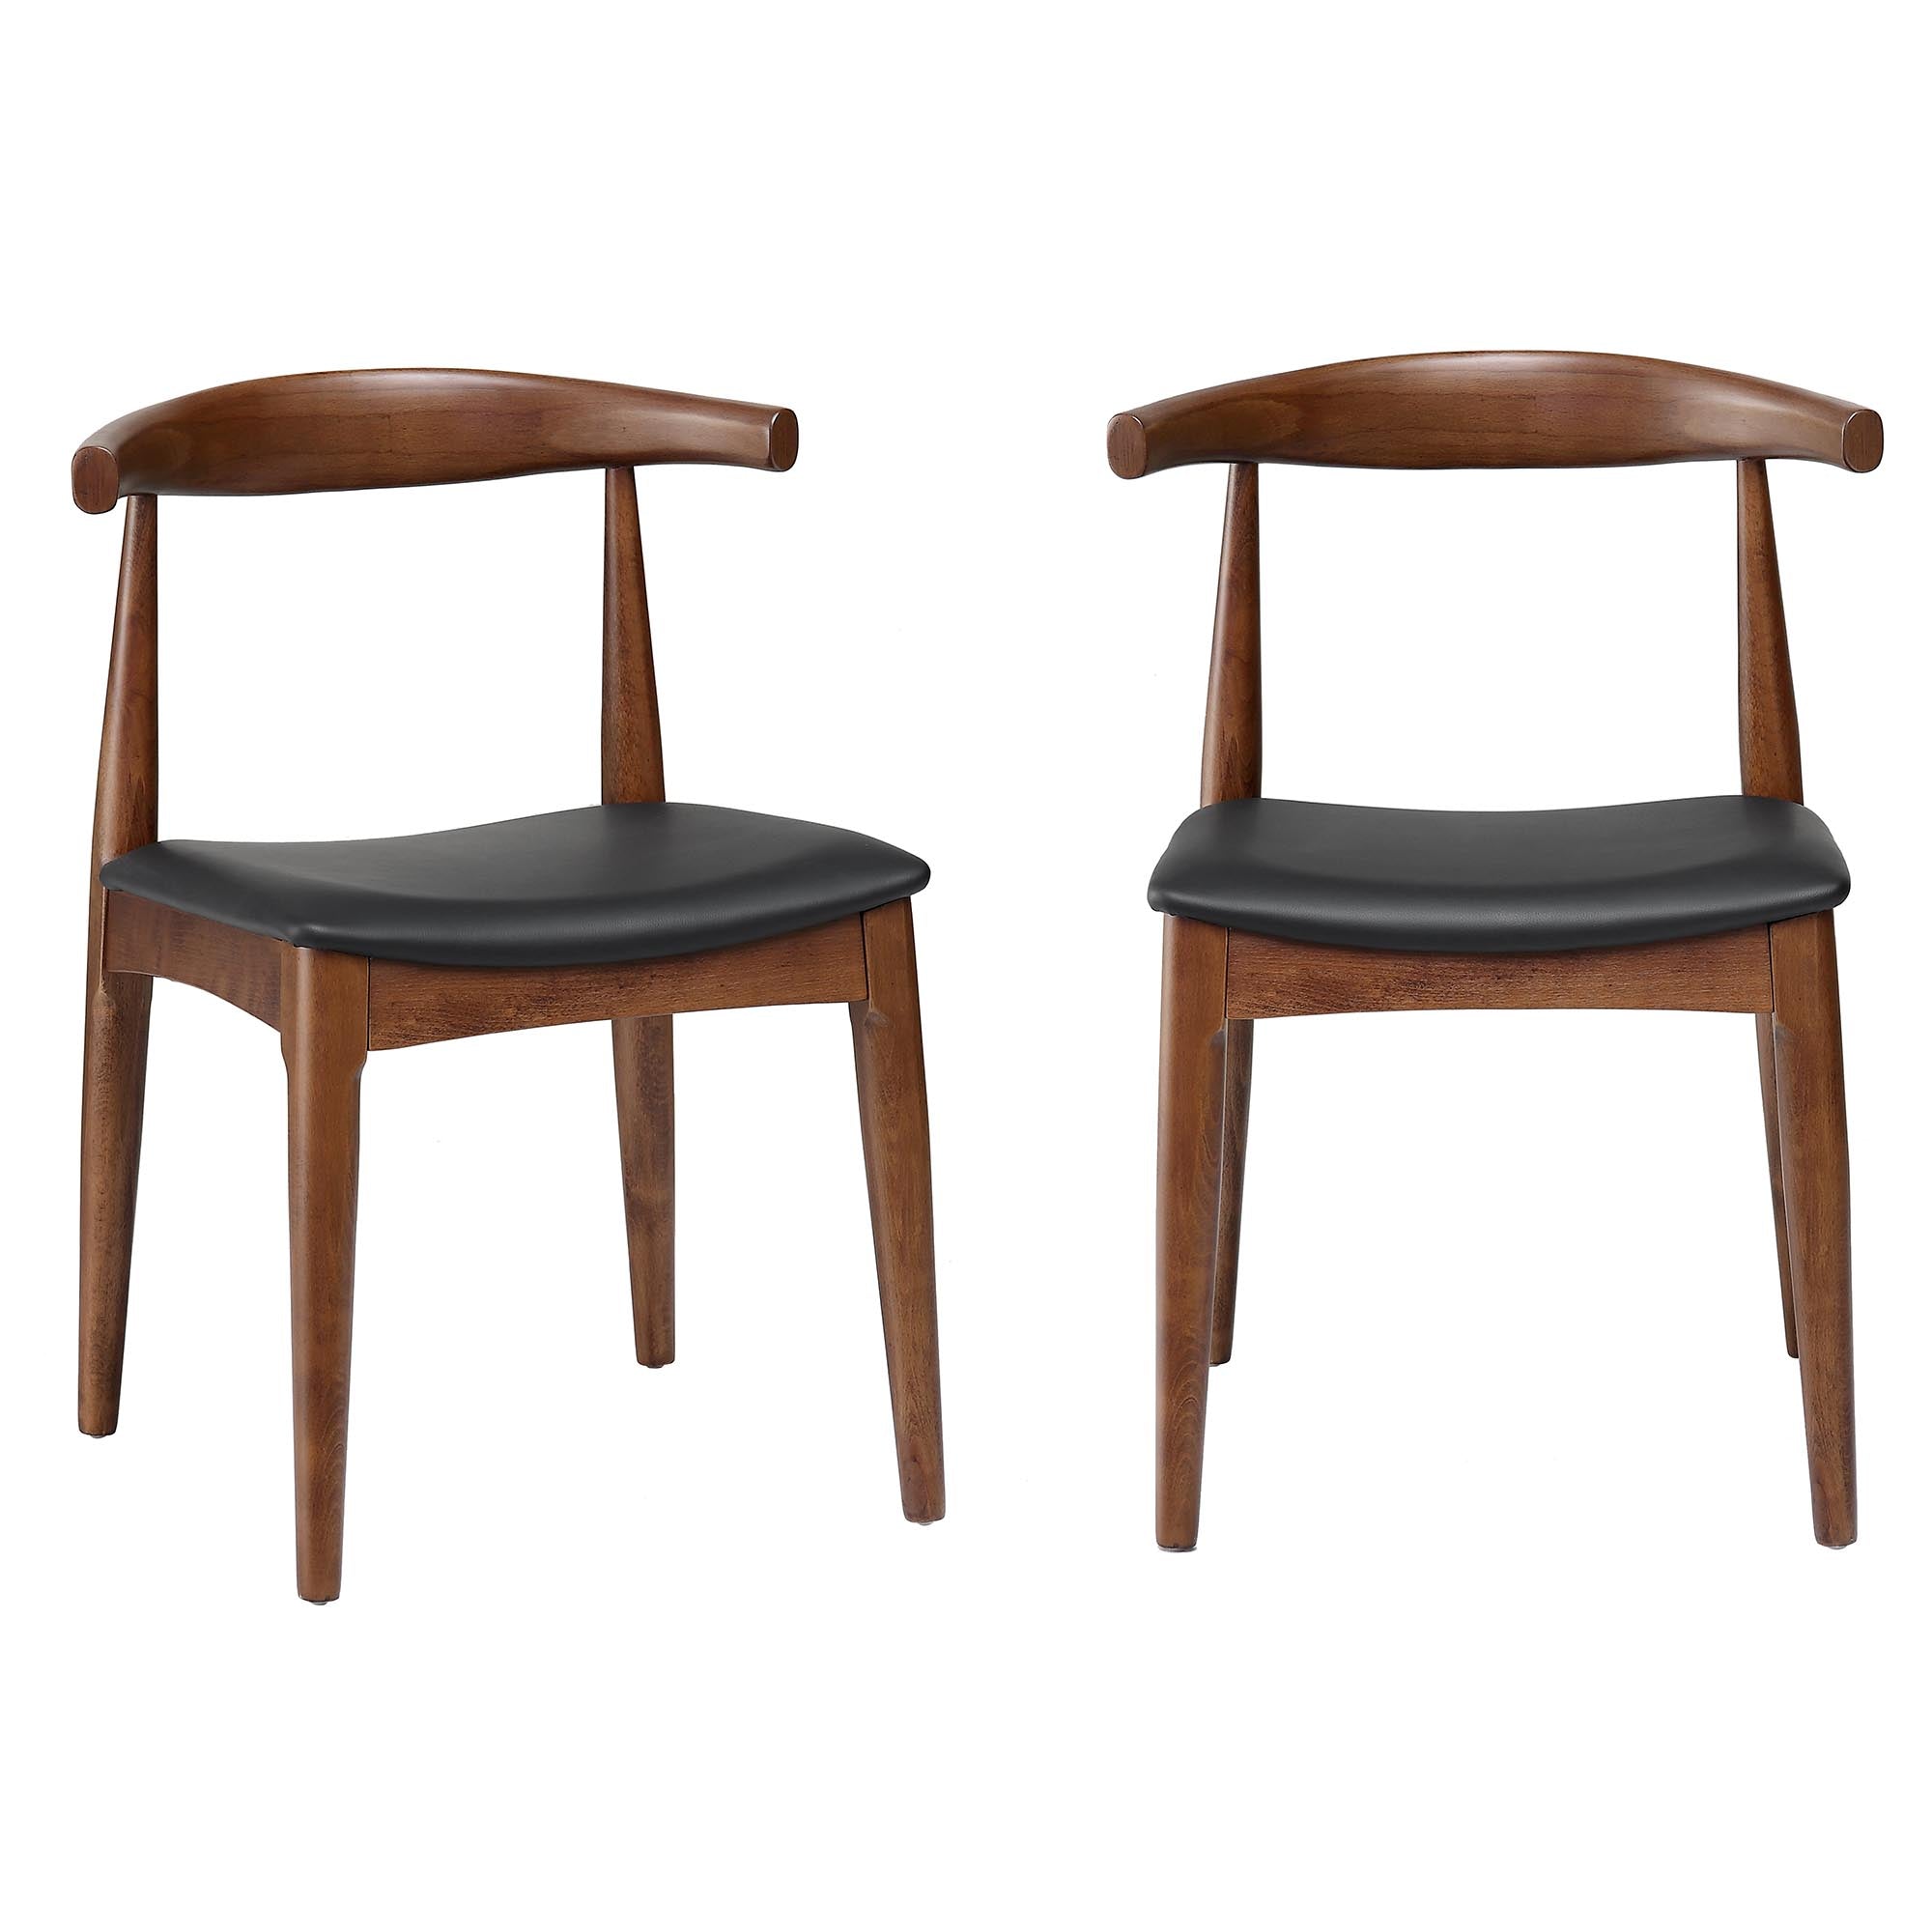 Arley Set of 2 Beech Wood Dining Chairs, Walnut and Black